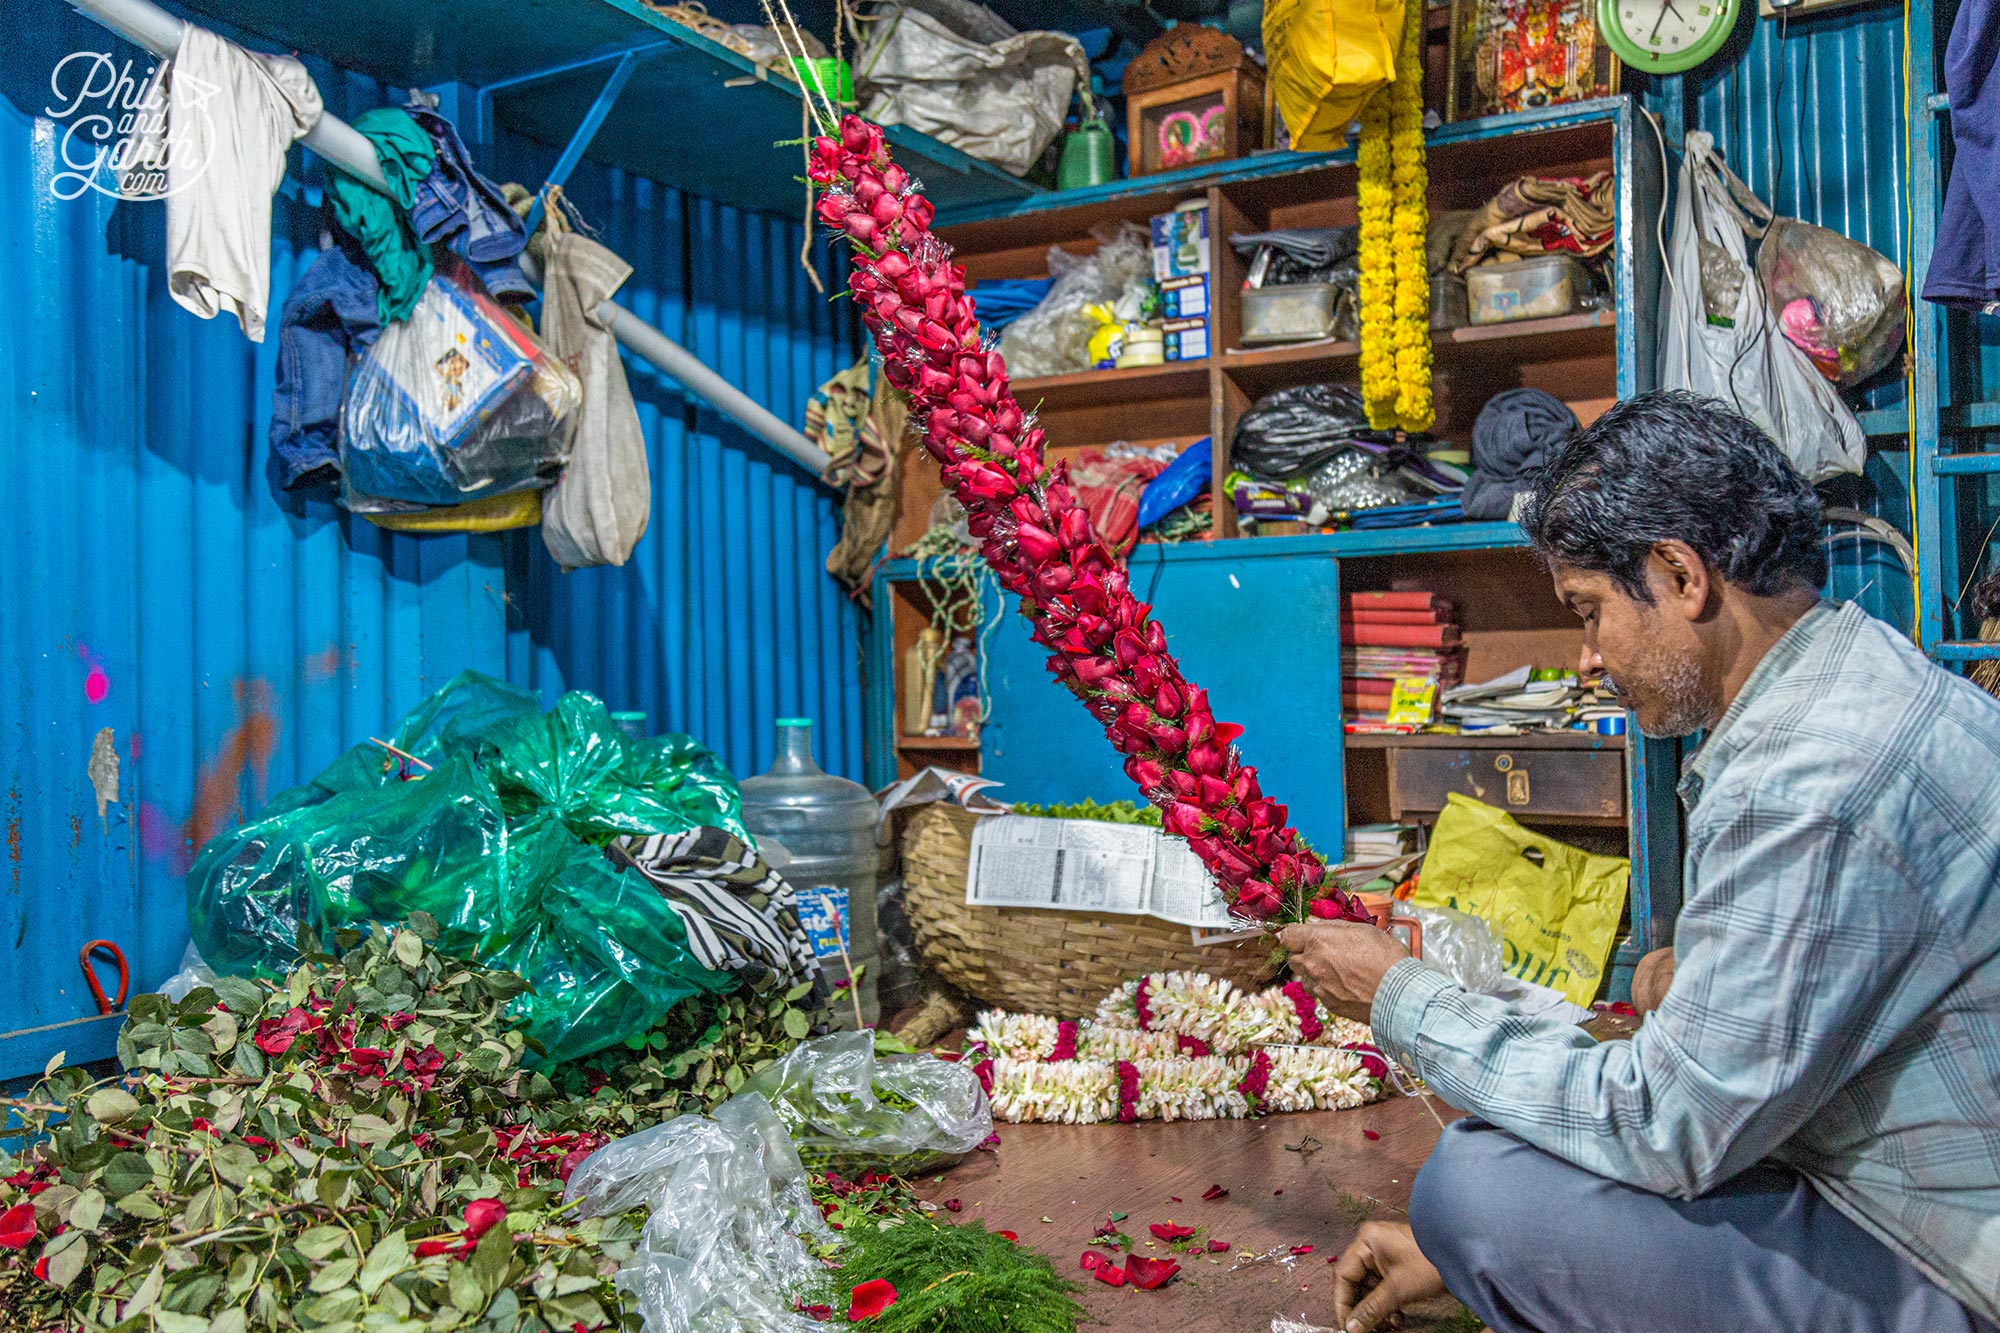 This man threads little red roses together to create somekind of garland